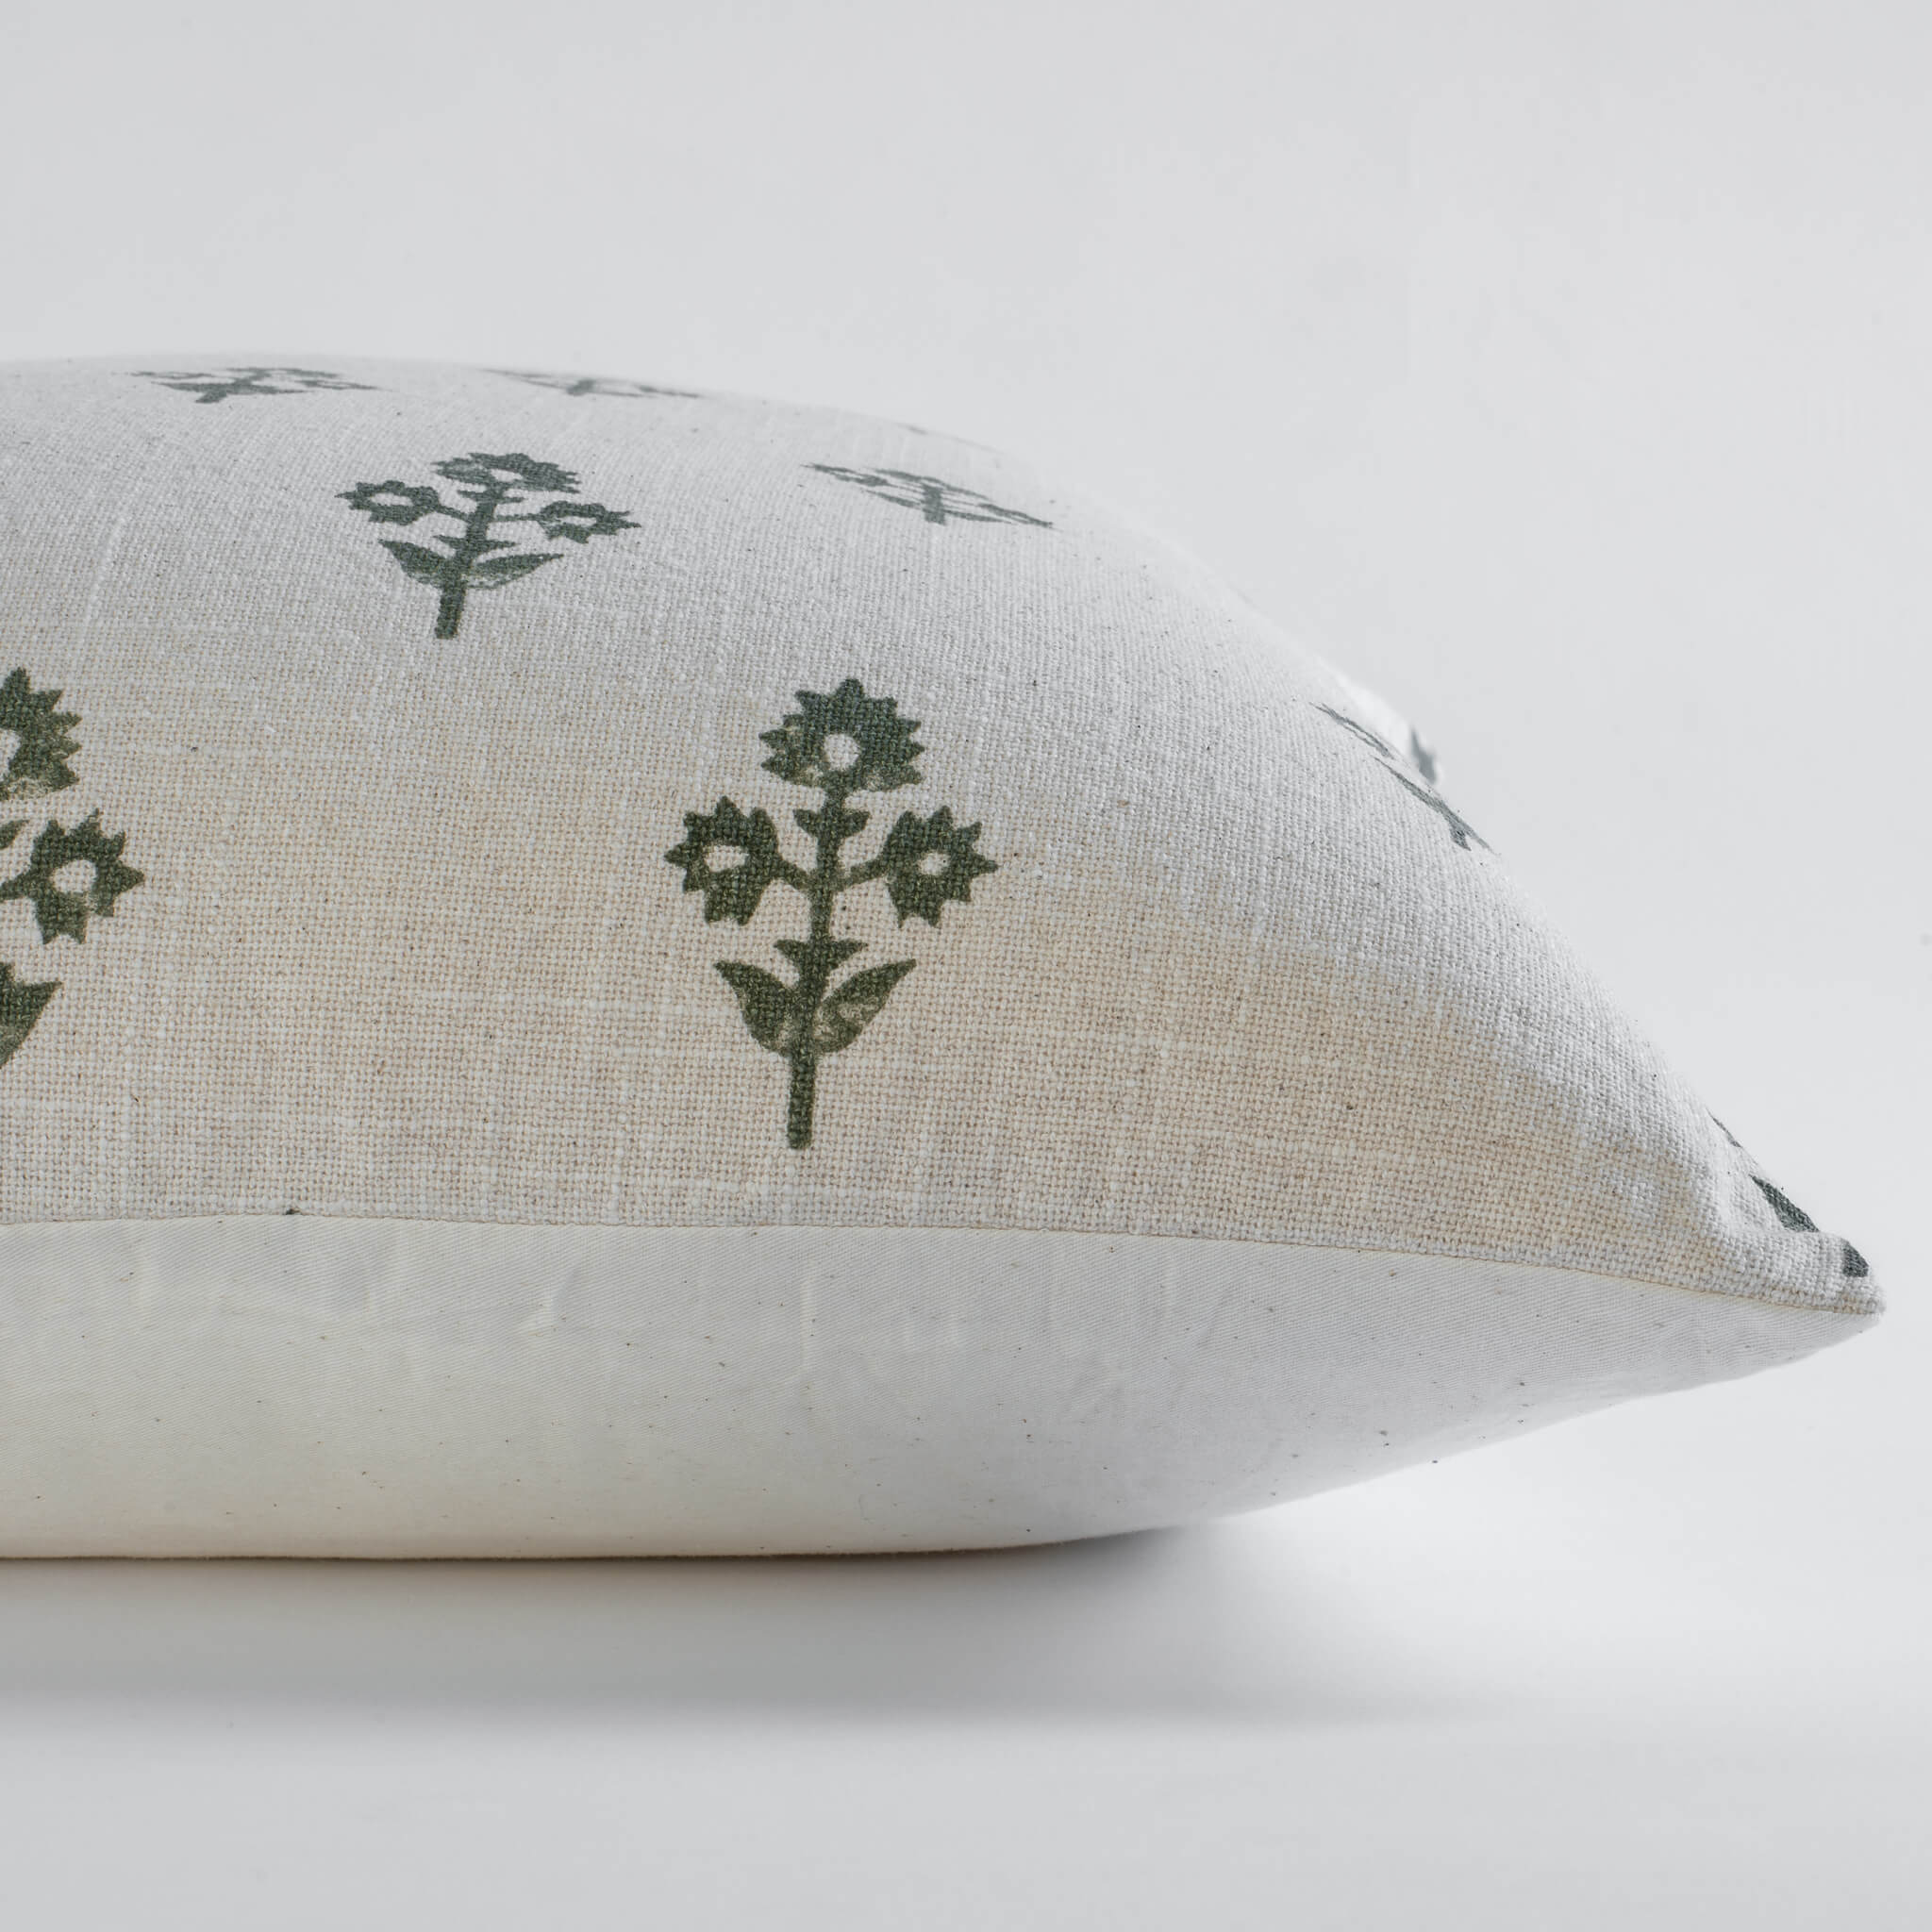 Mia Floral Block Printed Pillow Cover | Forest Green